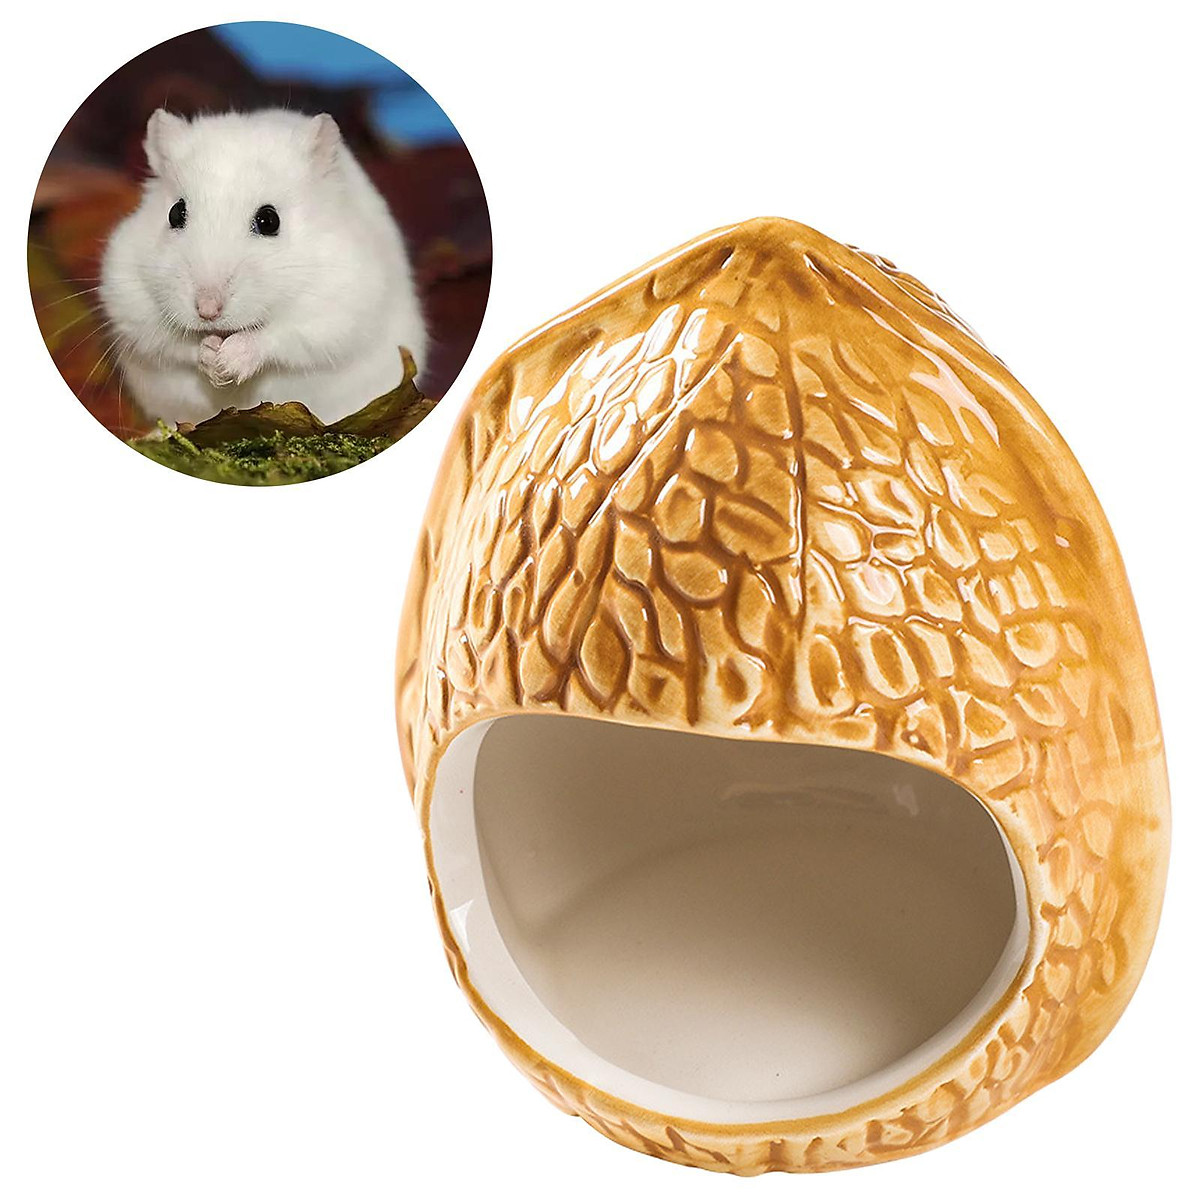 Cute Ceramic Hamster Cage Small Animal House Pet Nesting Summer ...